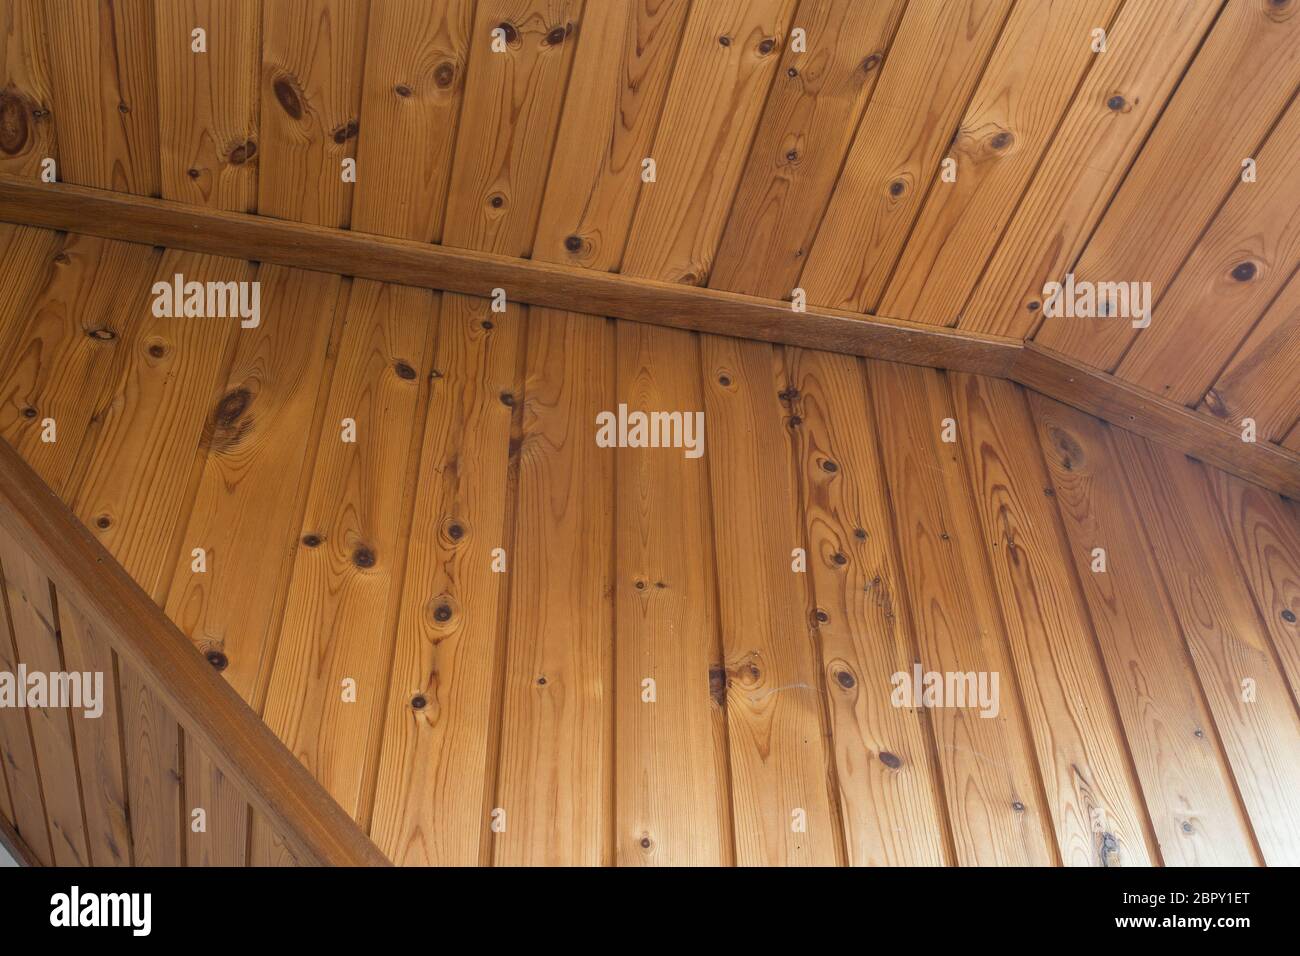 Old plaster and lath ceiling brown wood, vintage design close-up Stock Photo